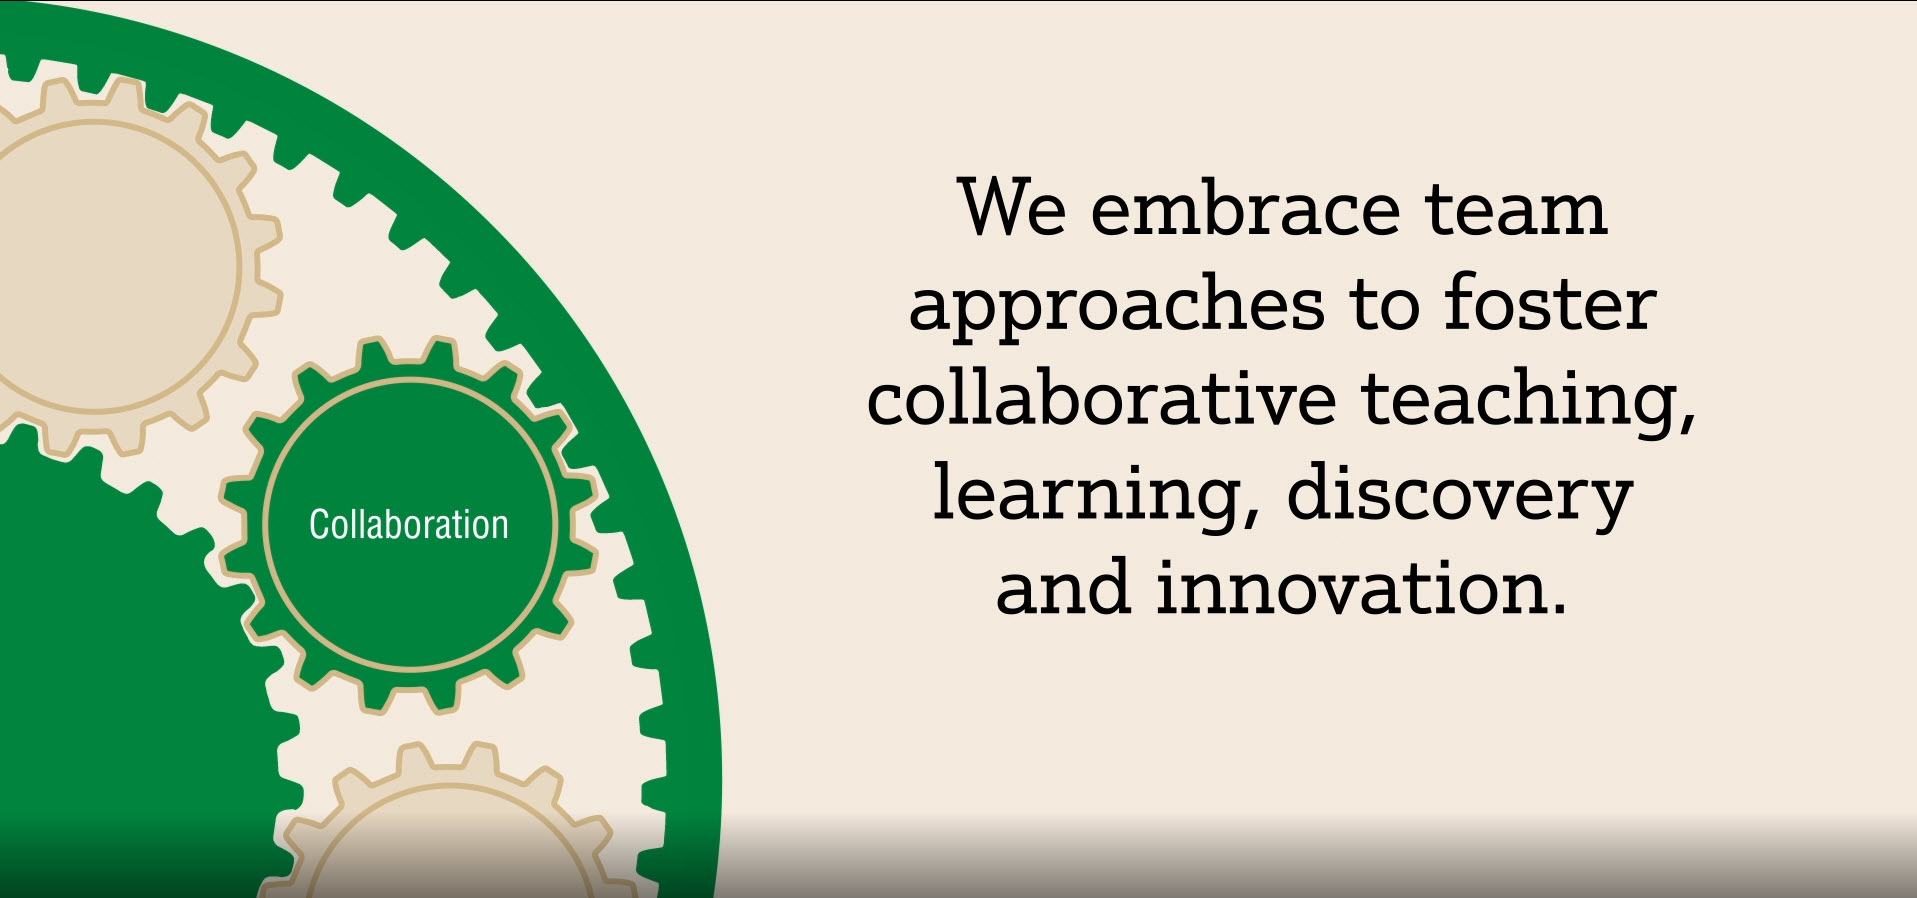 We embrace team approaches to foster collaborative teaching, learning, discovery and innovation.